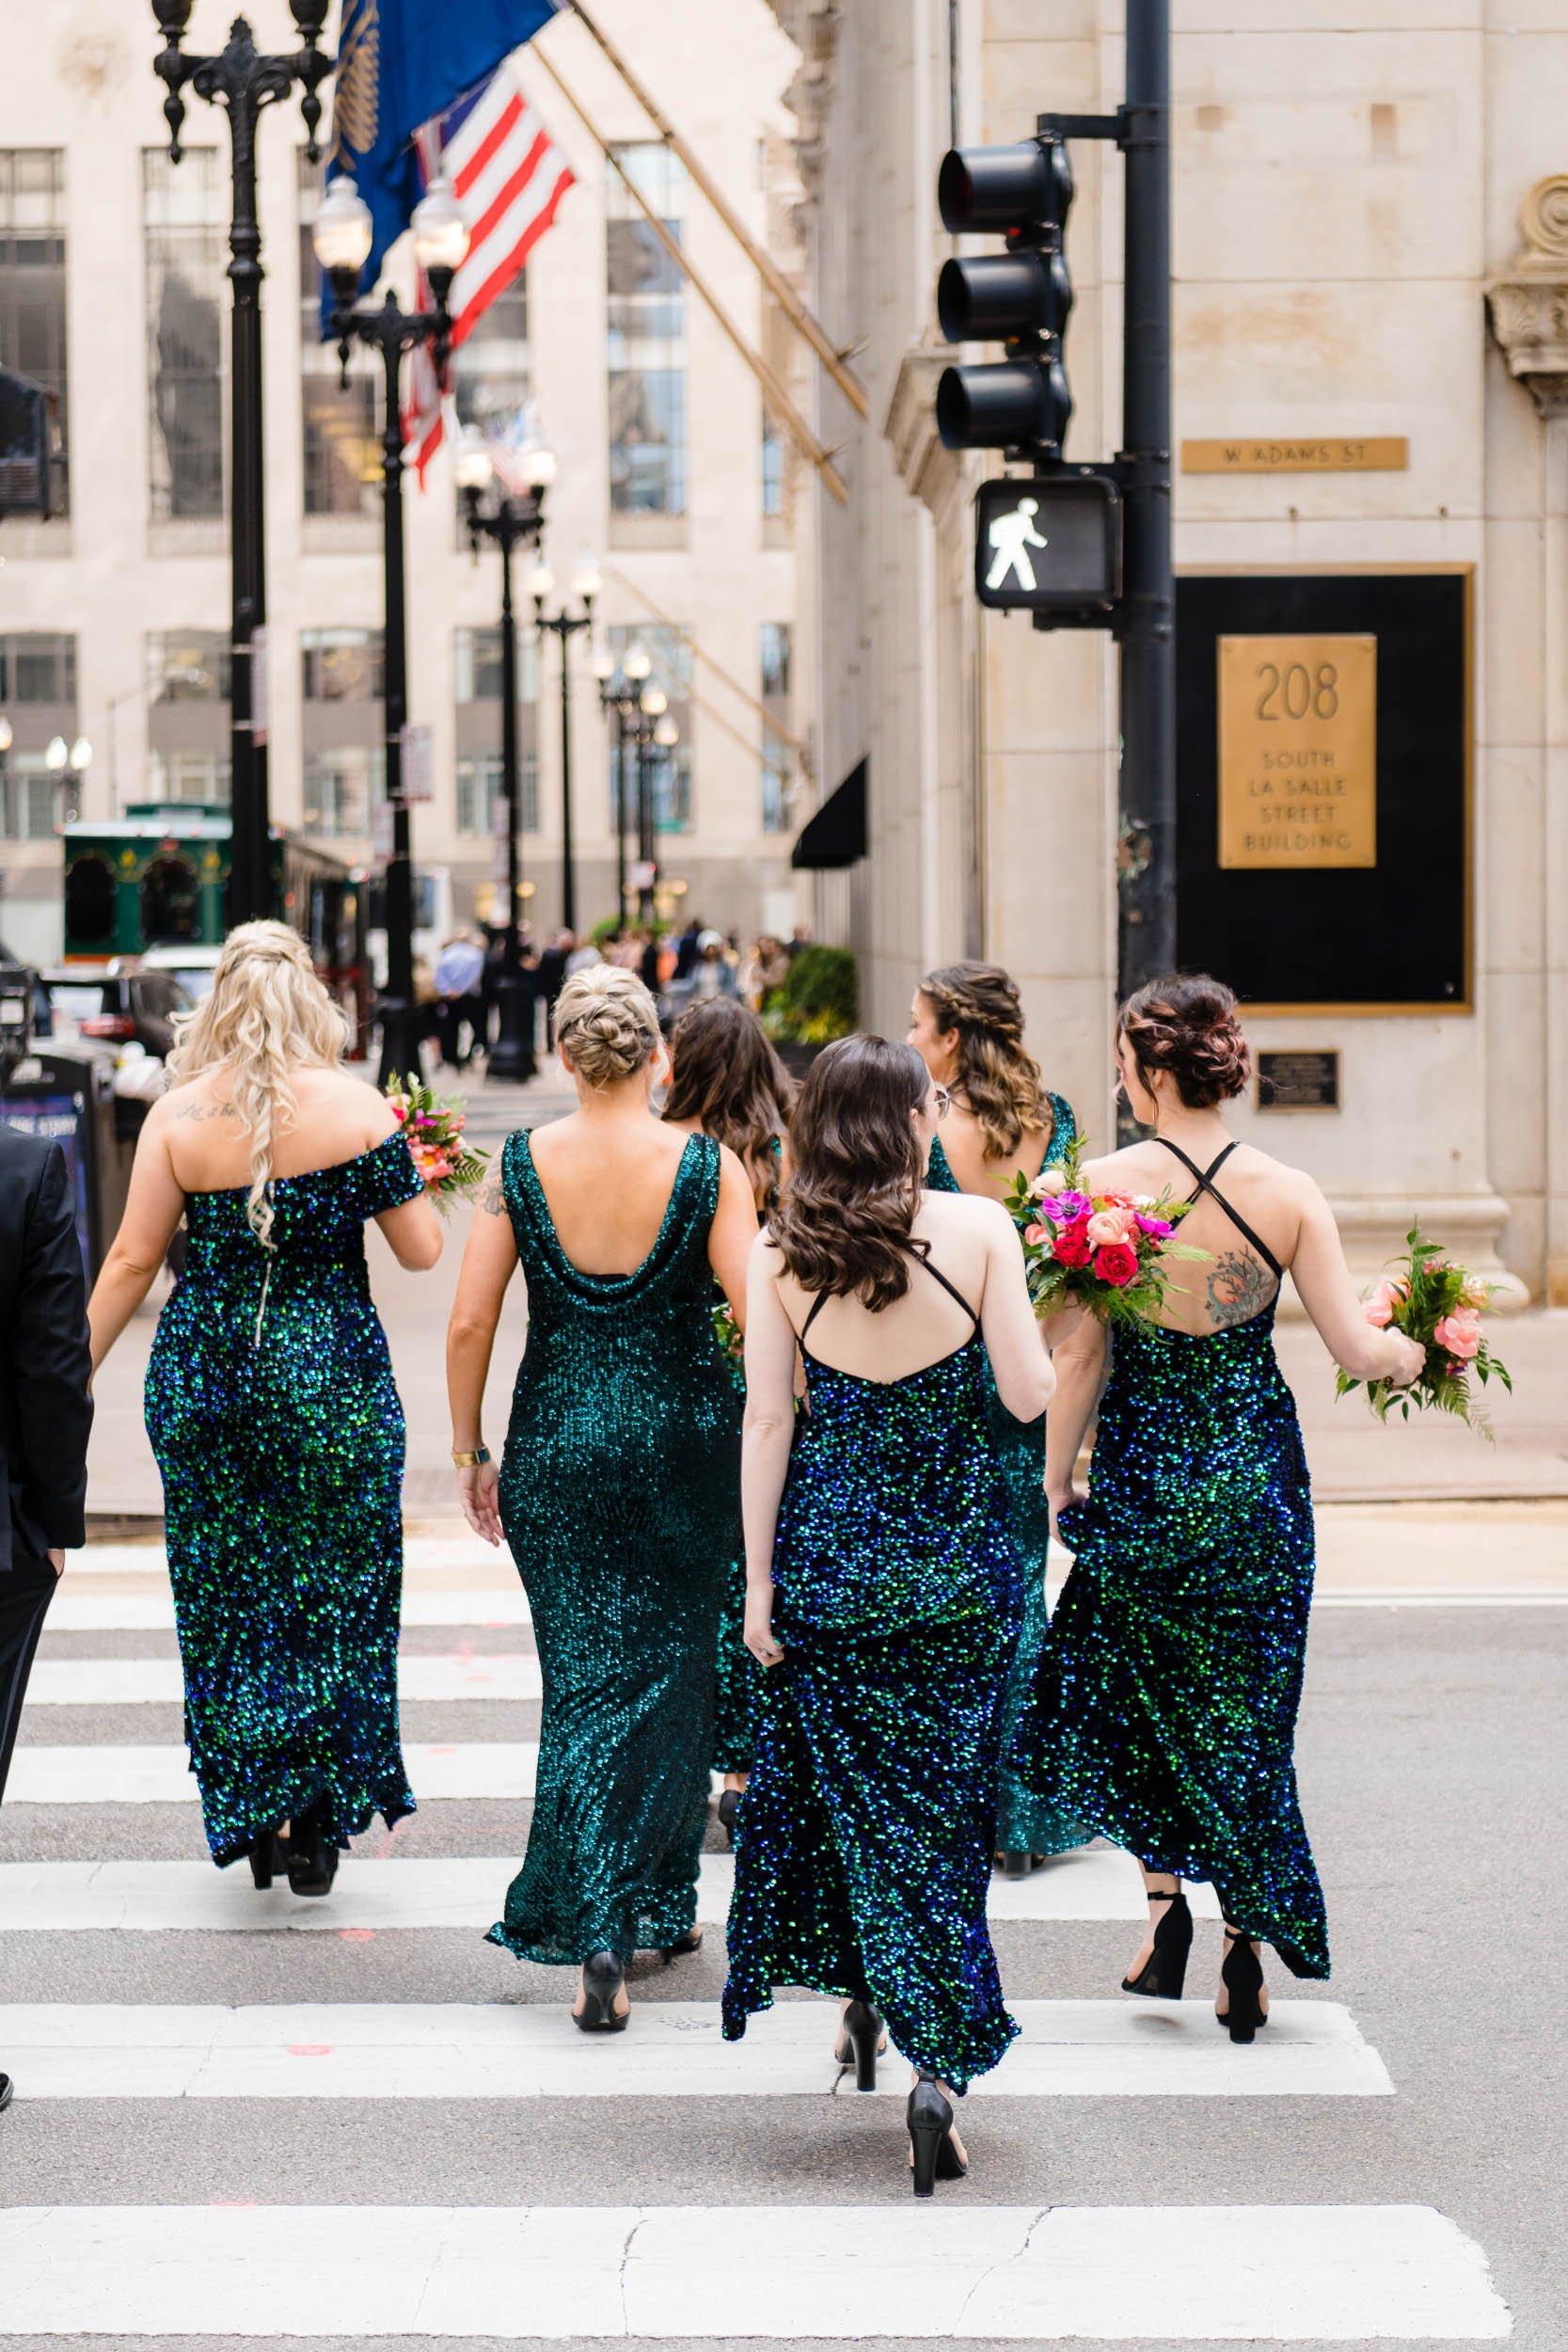 Downtown Chicago | Outdoor wedding party photo | Chicago IL